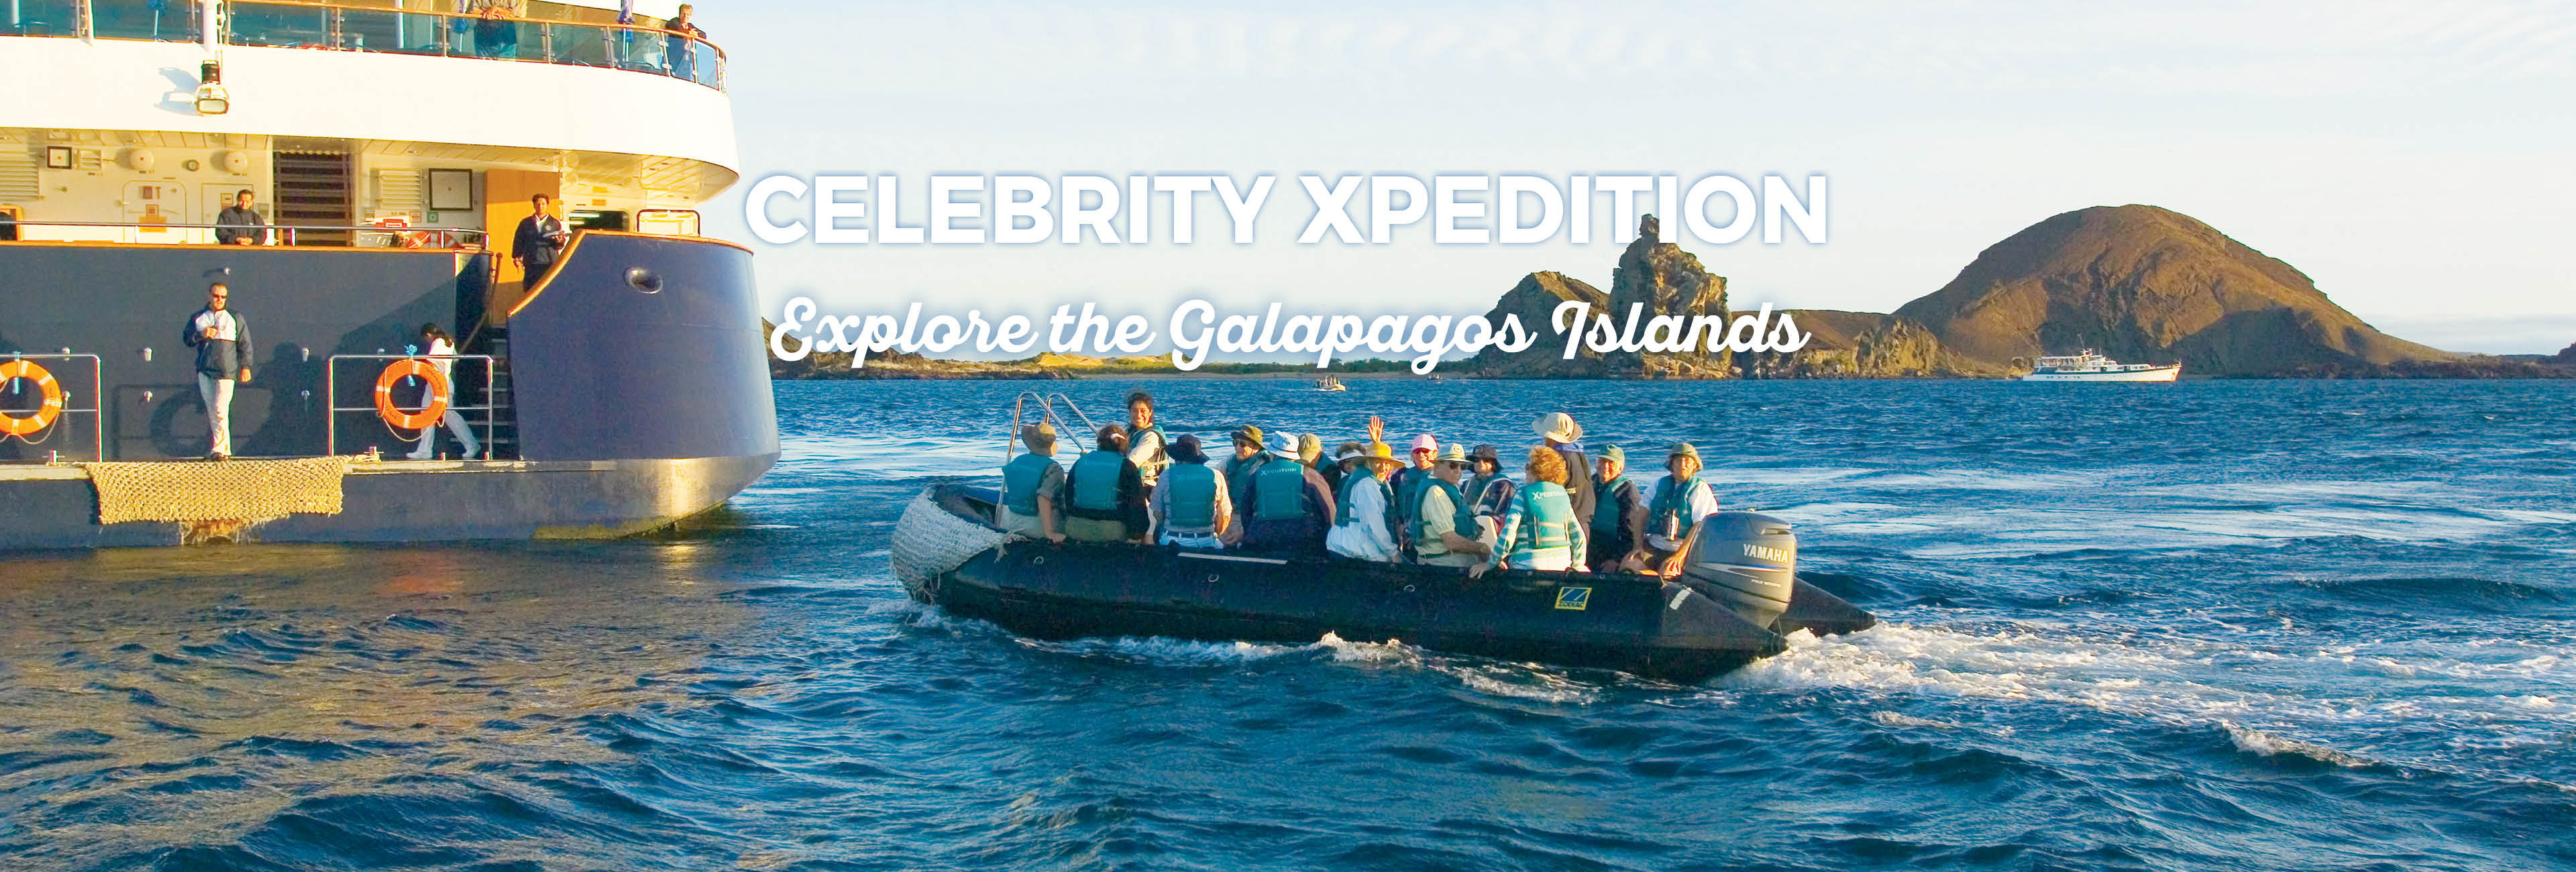 celebrity-xpedition-1.jpg